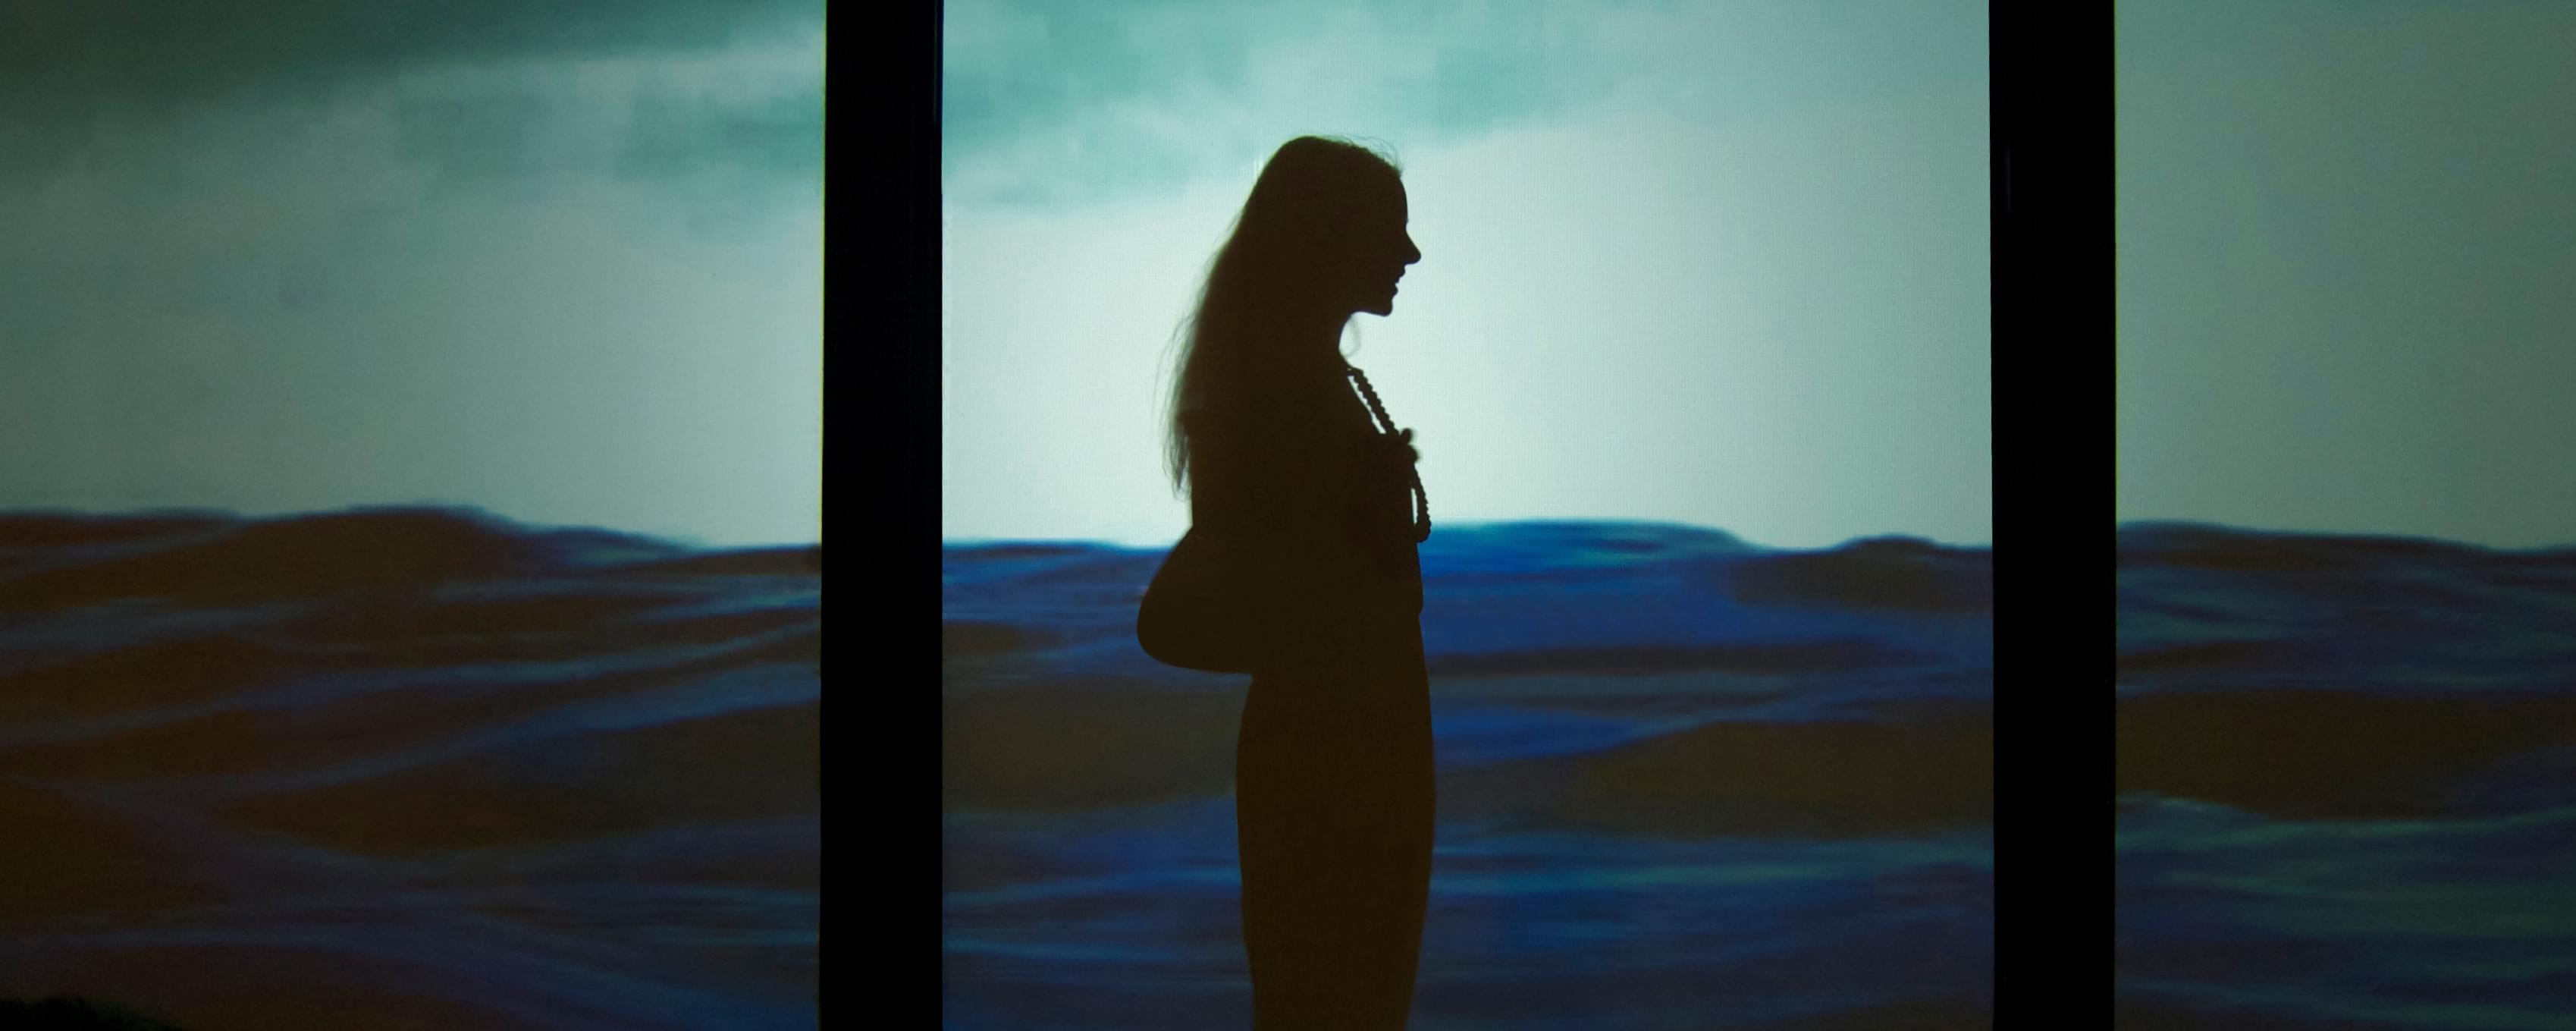 Photograph of a women's silhouette is shown in front of a projection of a body of water that is up to her chest; a blue sky is behind her